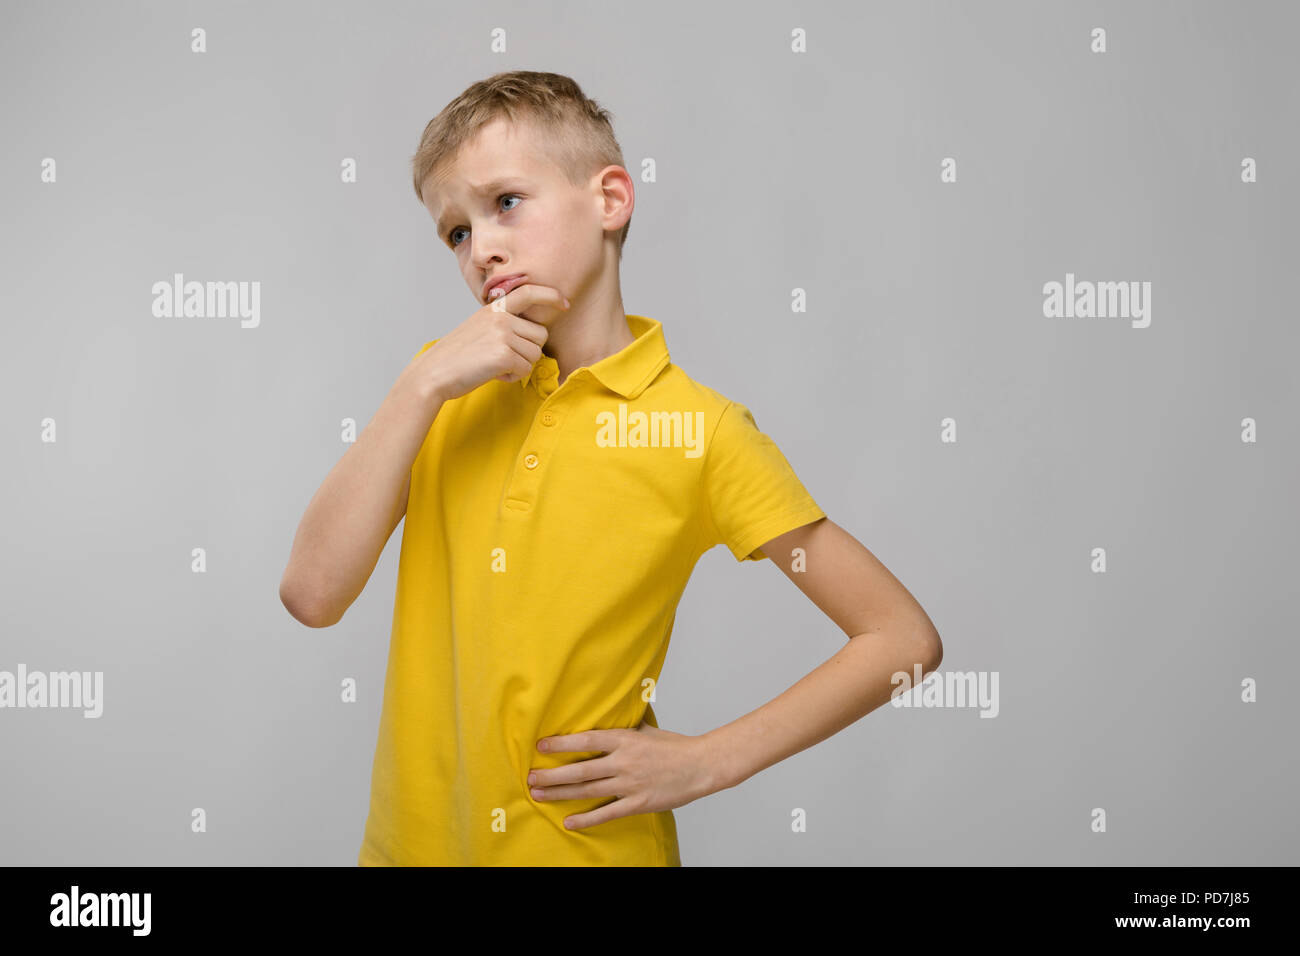 Puzzled Little Boy High Resolution Stock Photography and Images - Alamy